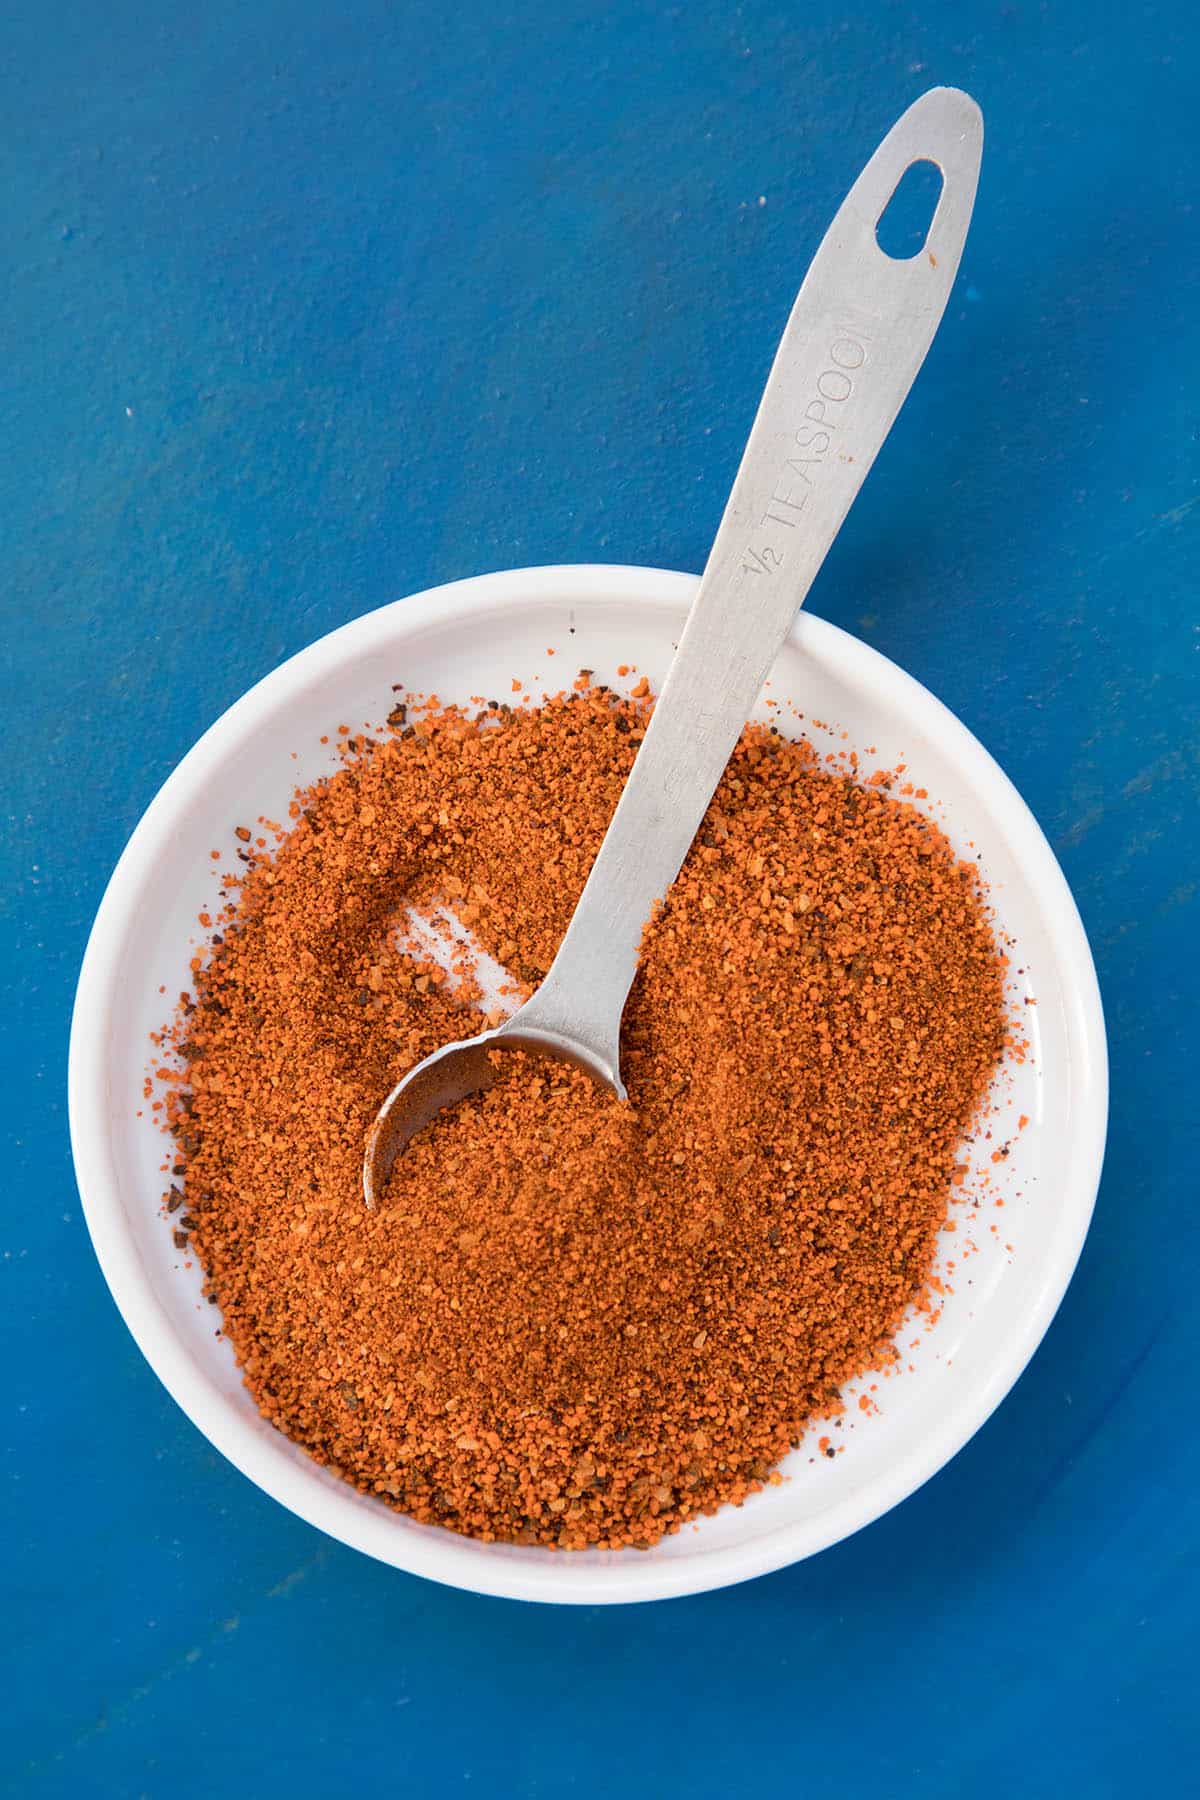 How to Make Homemade Spicy Chili Powder - A Recipe